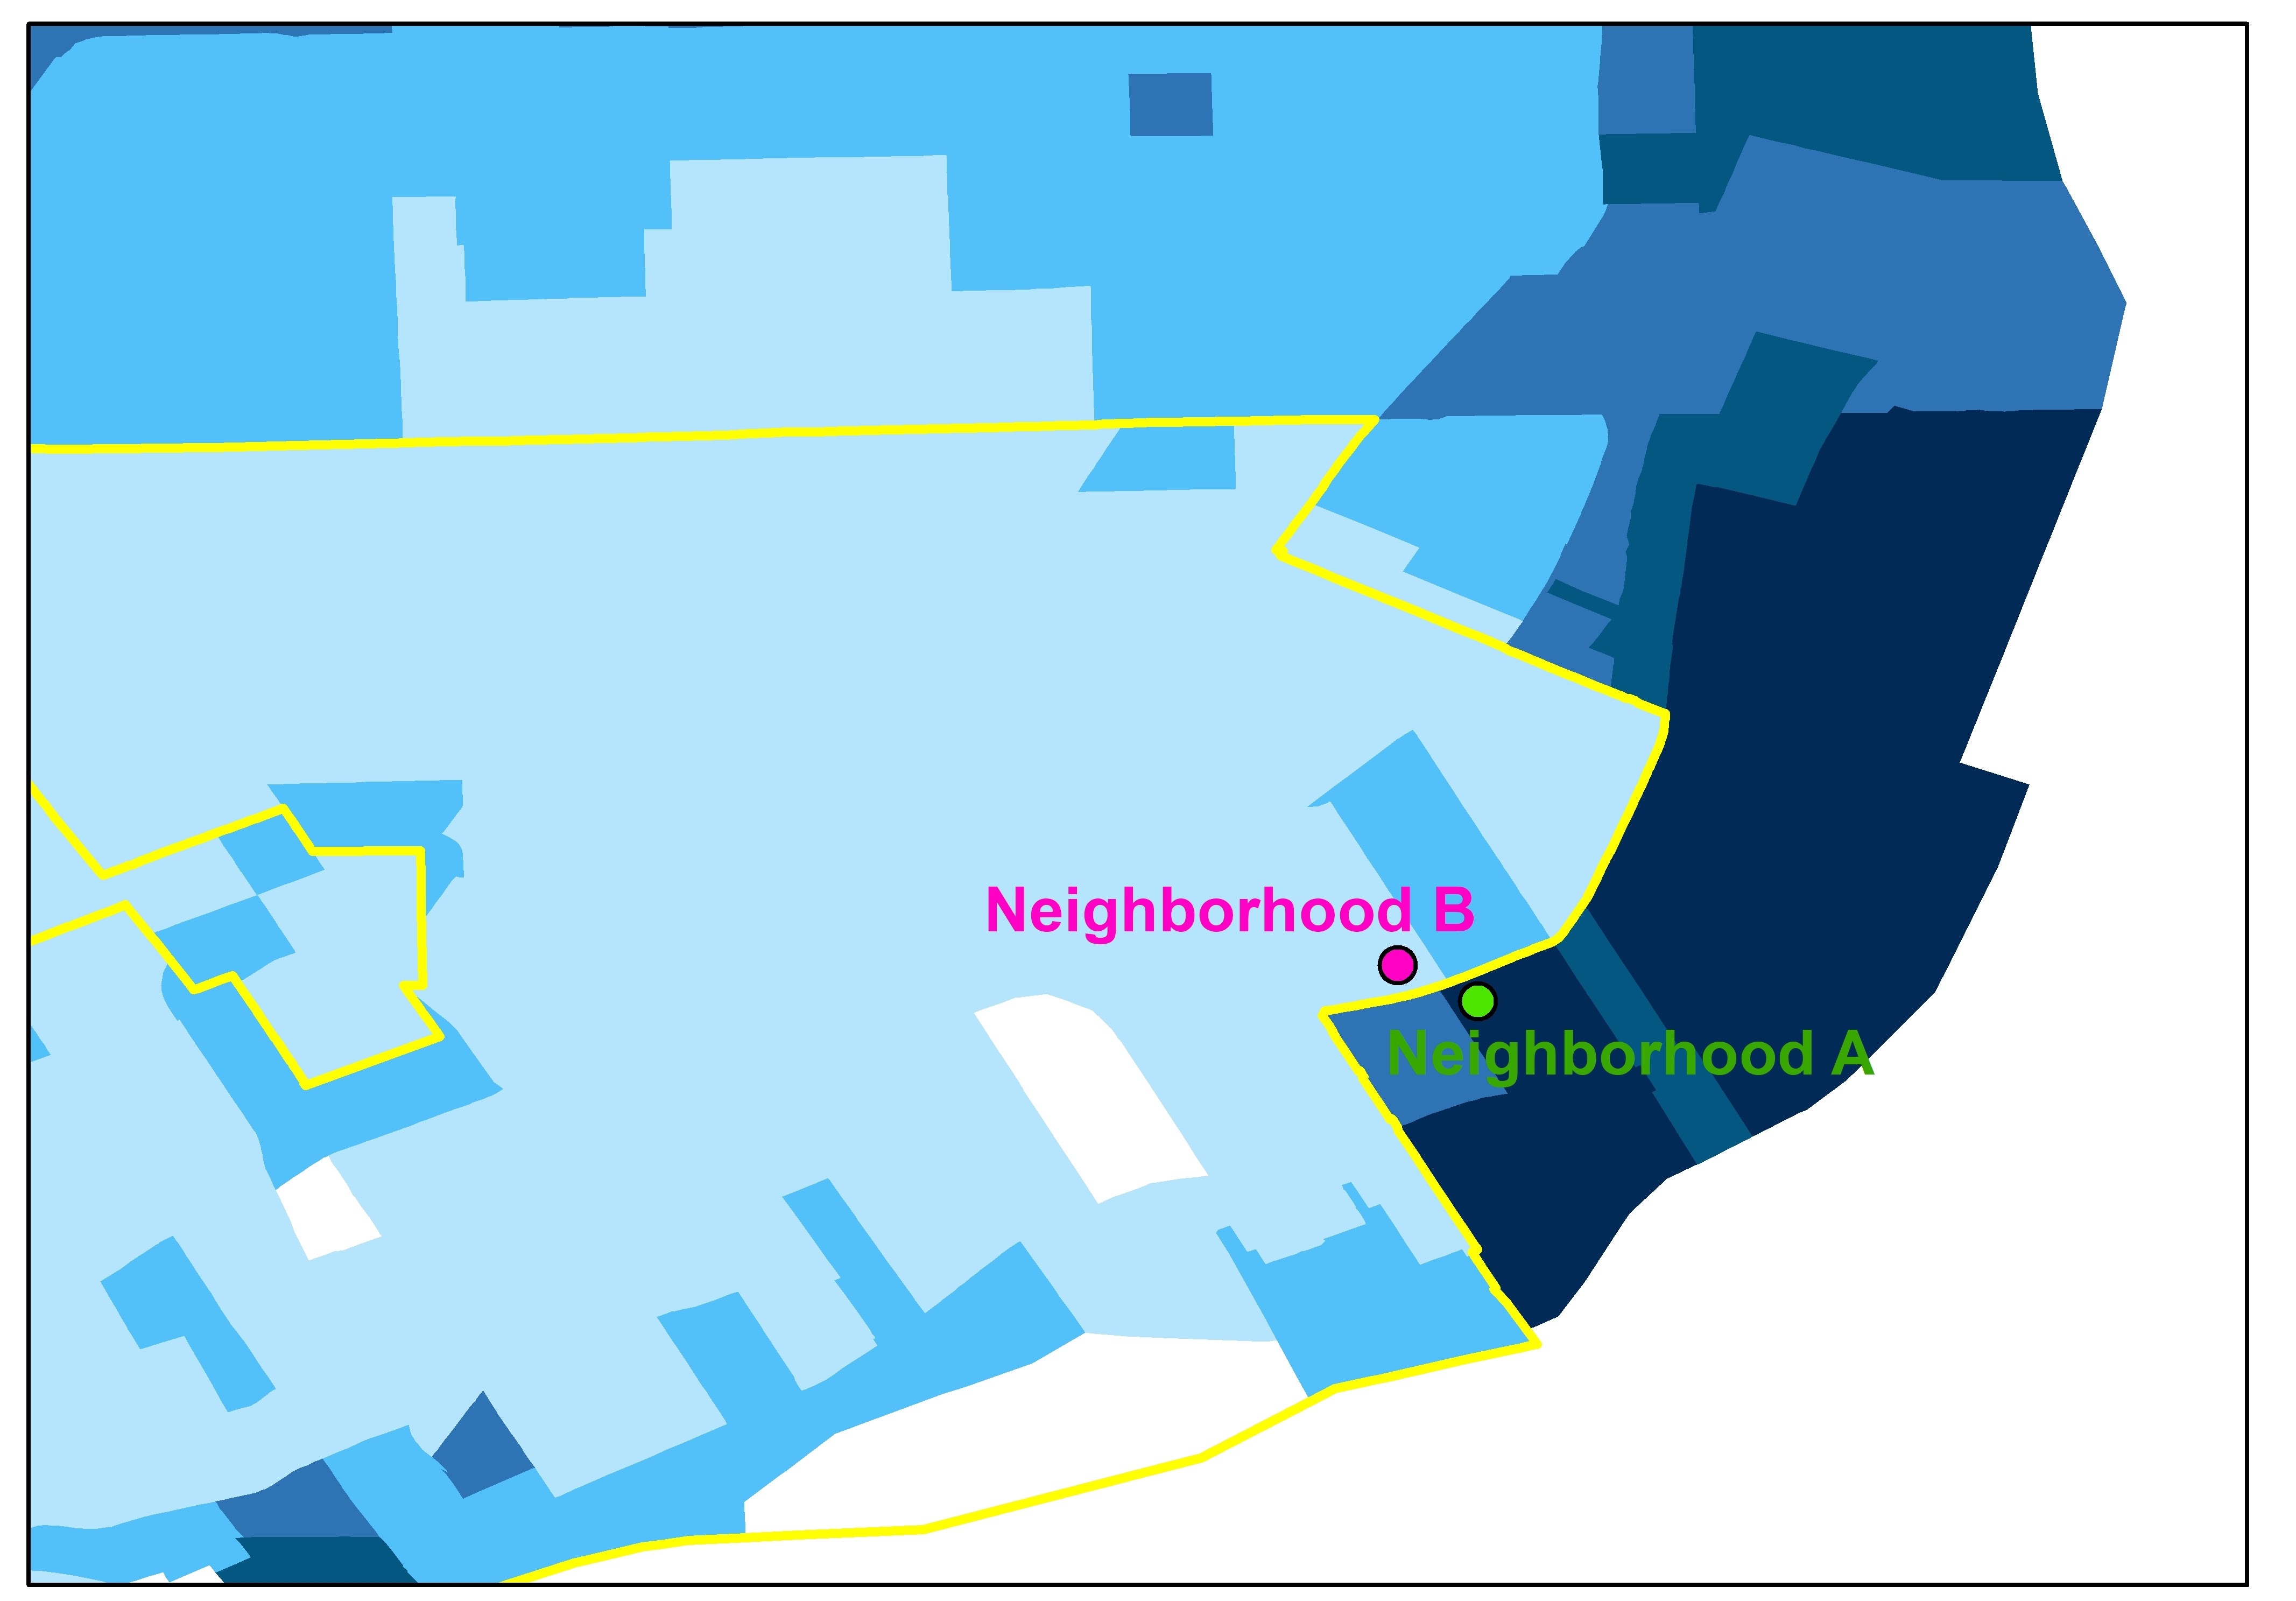 Inset map showing two neighborhoods in Detroit